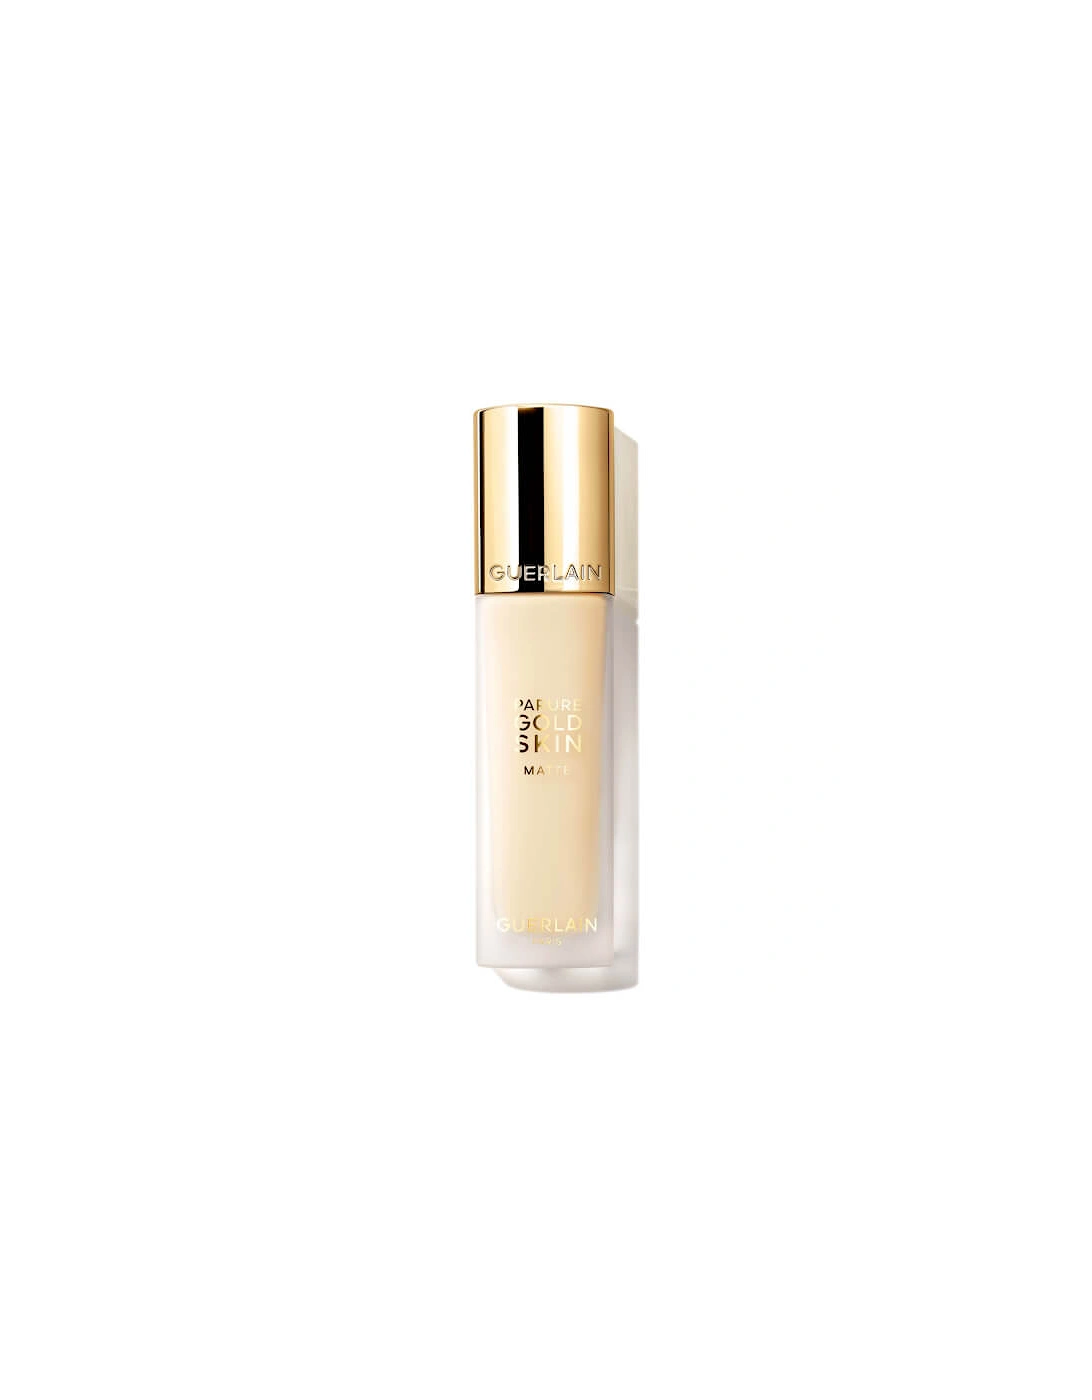 Parure Gold Skin 24H No-Transfer High Perfection Foundation - 0W Warm / Doré, 2 of 1